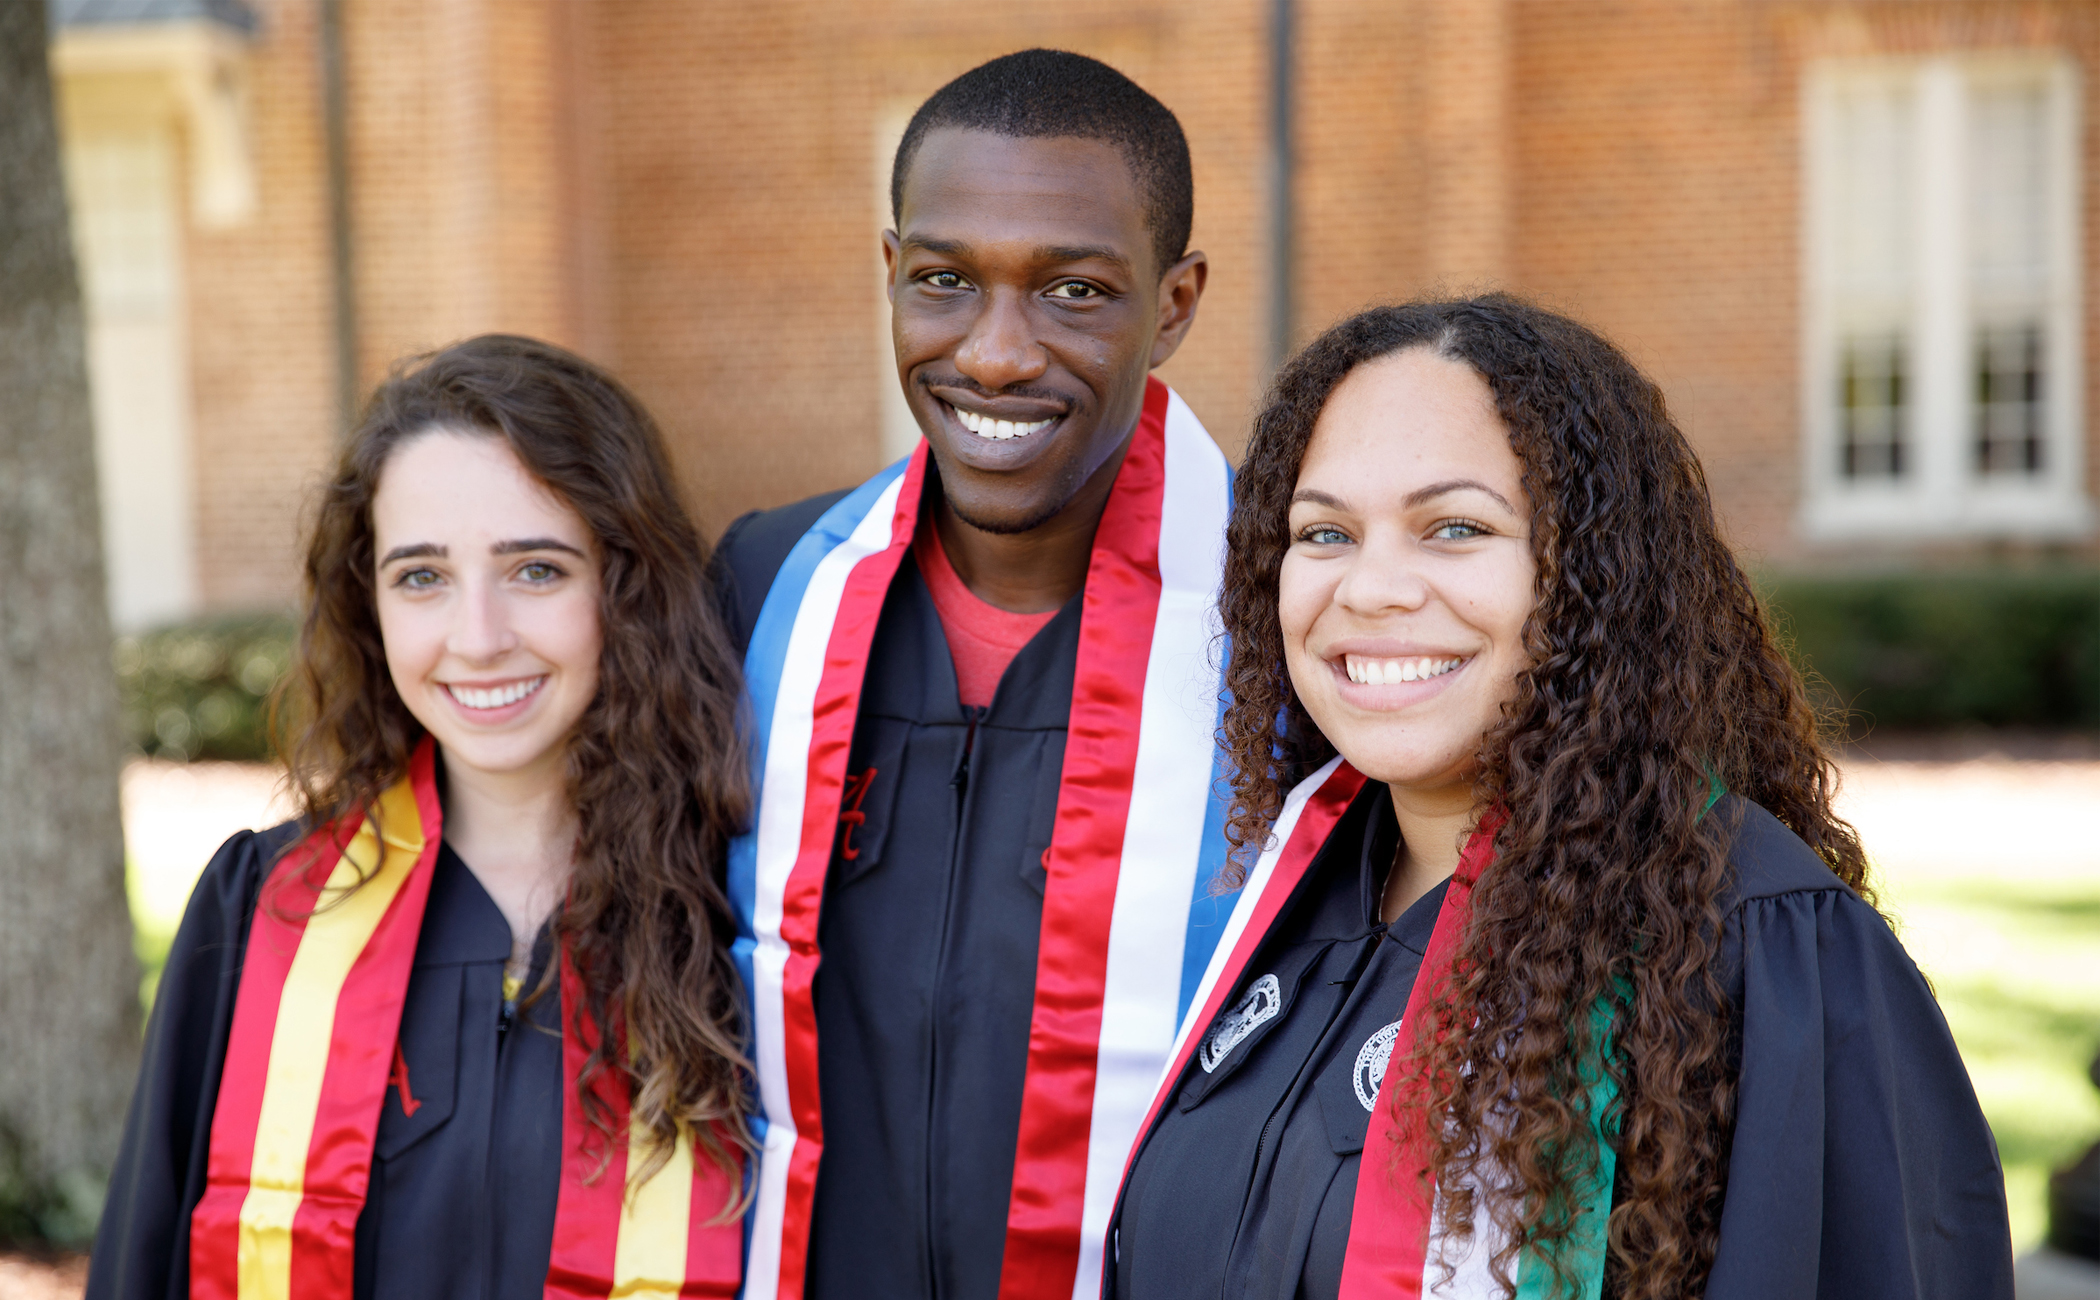 Three students wearing graduation gowns.